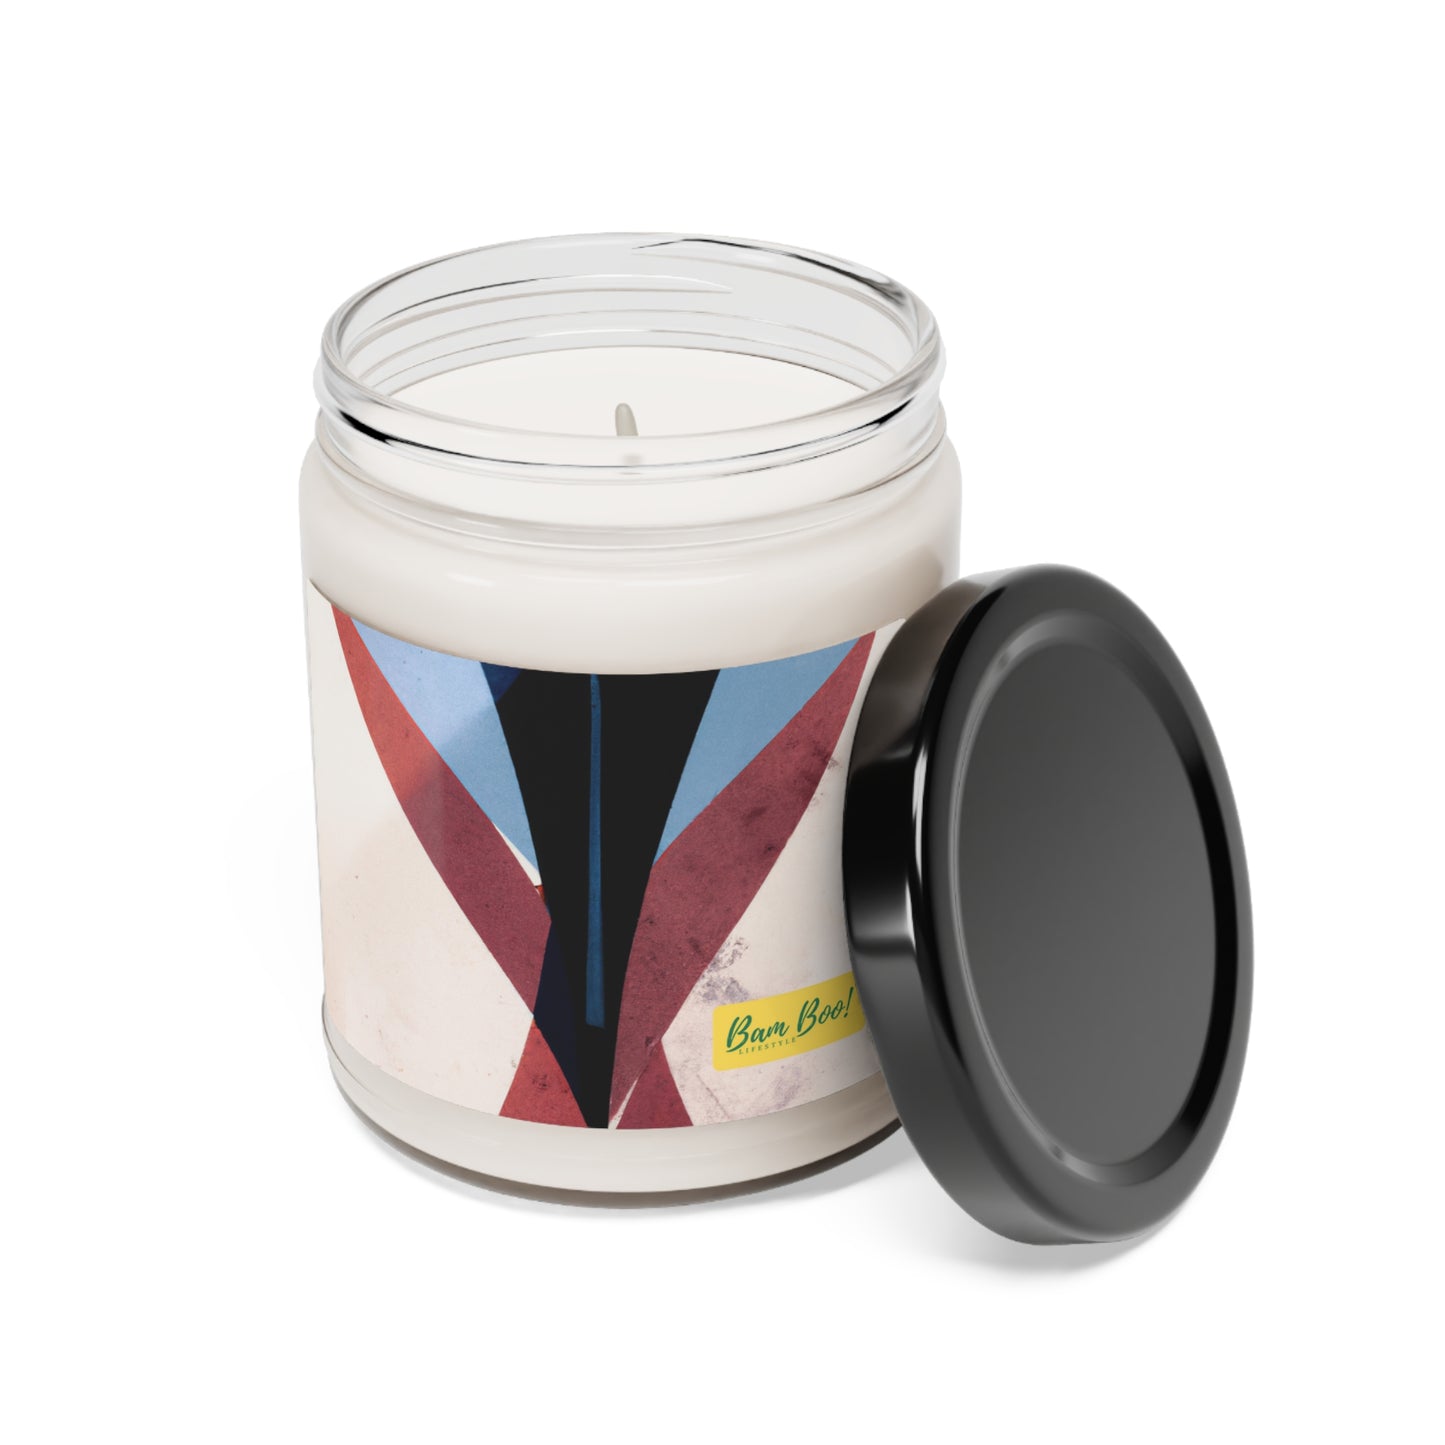 "The Artistry of Emotional Expressions" - Bam Boo! Lifestyle Eco-friendly Soy Candle